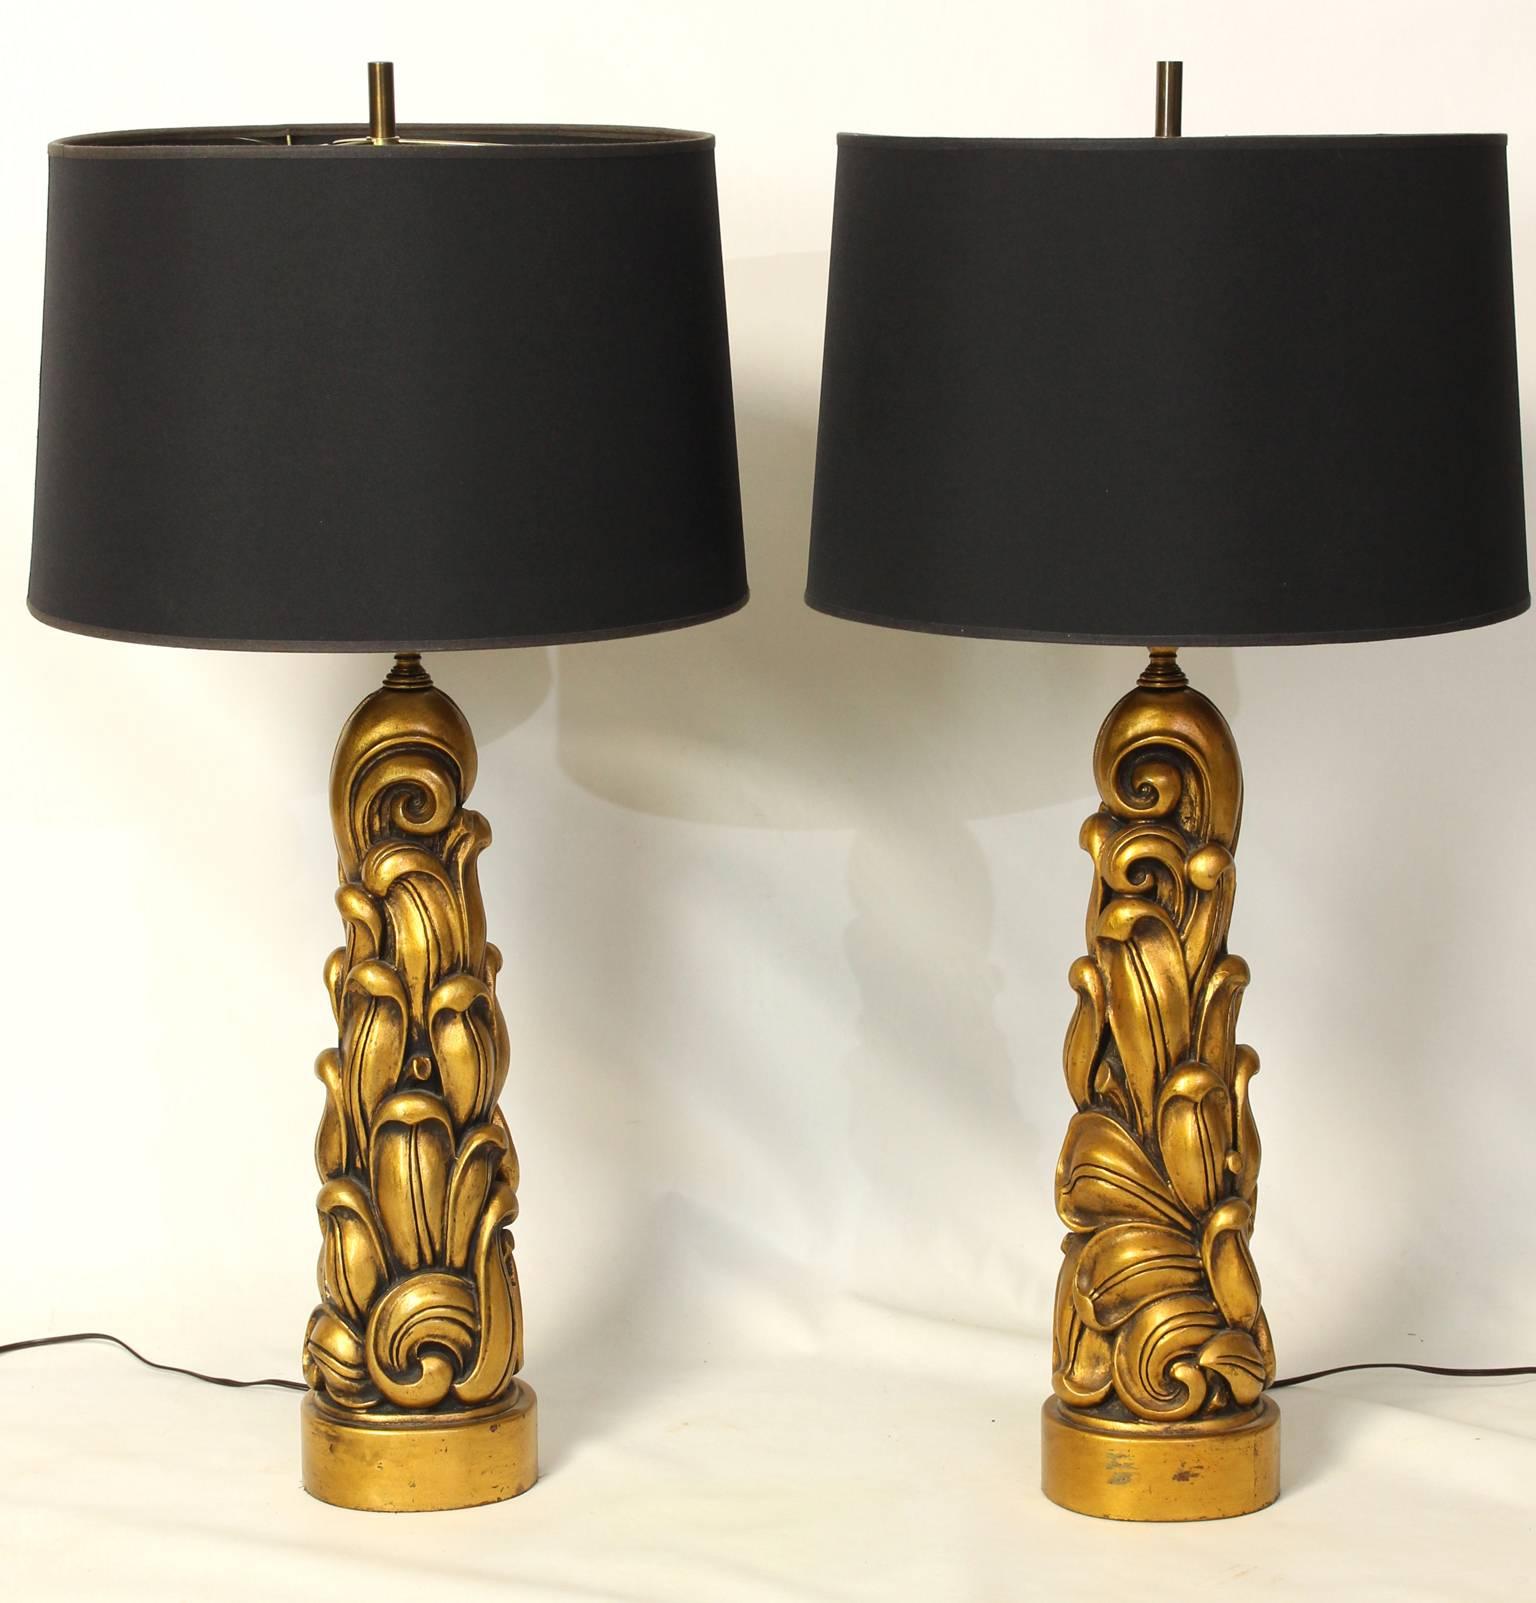 A fantastic pair of large sculptural carved and gilt decorated wood table lamps dating from the 1940's by James Mont. 